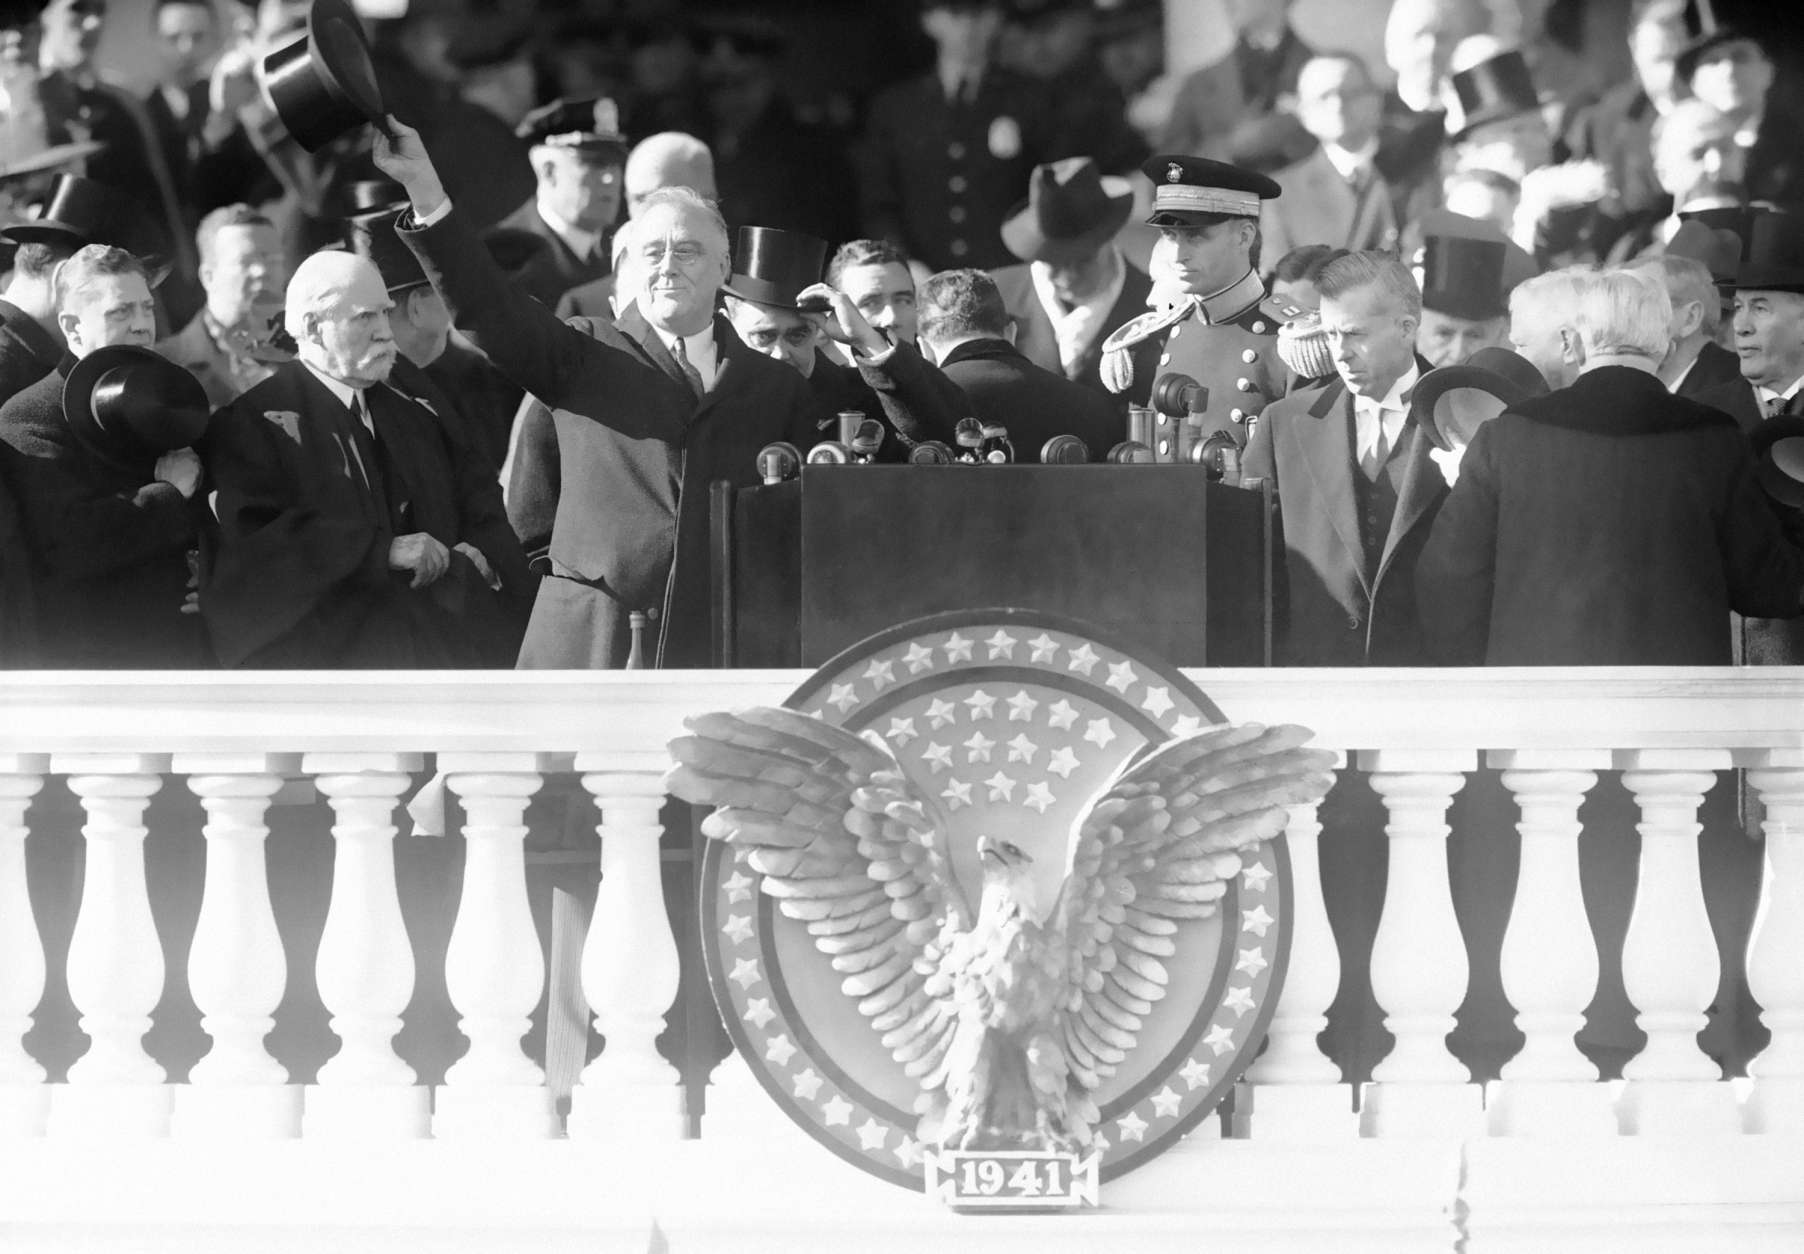 FILE - This Jan. 20, 1941 black-and-white file photo shows President Franklin Delano Roosevelt waving from the inaugural stand on Capitol Hill in Washington. Sixteen presidents before Barack Obama got a second chance at giving an inaugural address for the ages. Most didnt make much of it. Abraham Lincoln is the grand exception. (AP Photo, File)